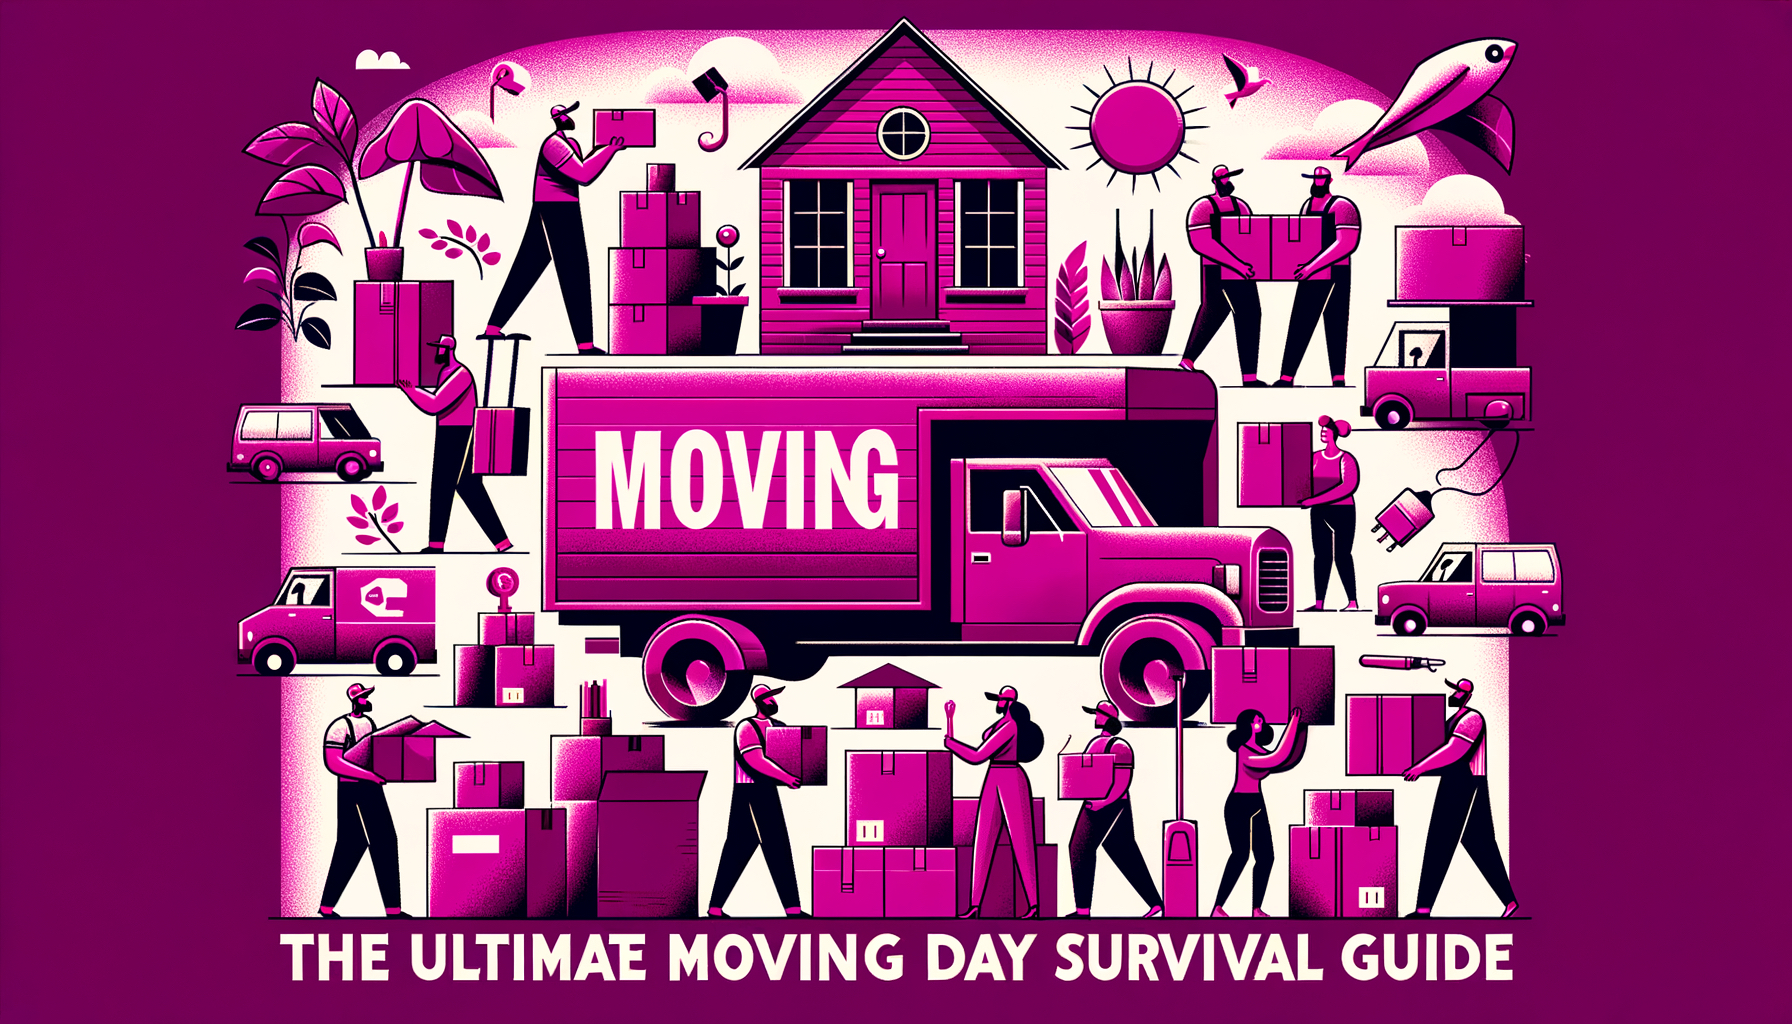 Illustrative fuschia colored cartoon image related to moving day survival guide.